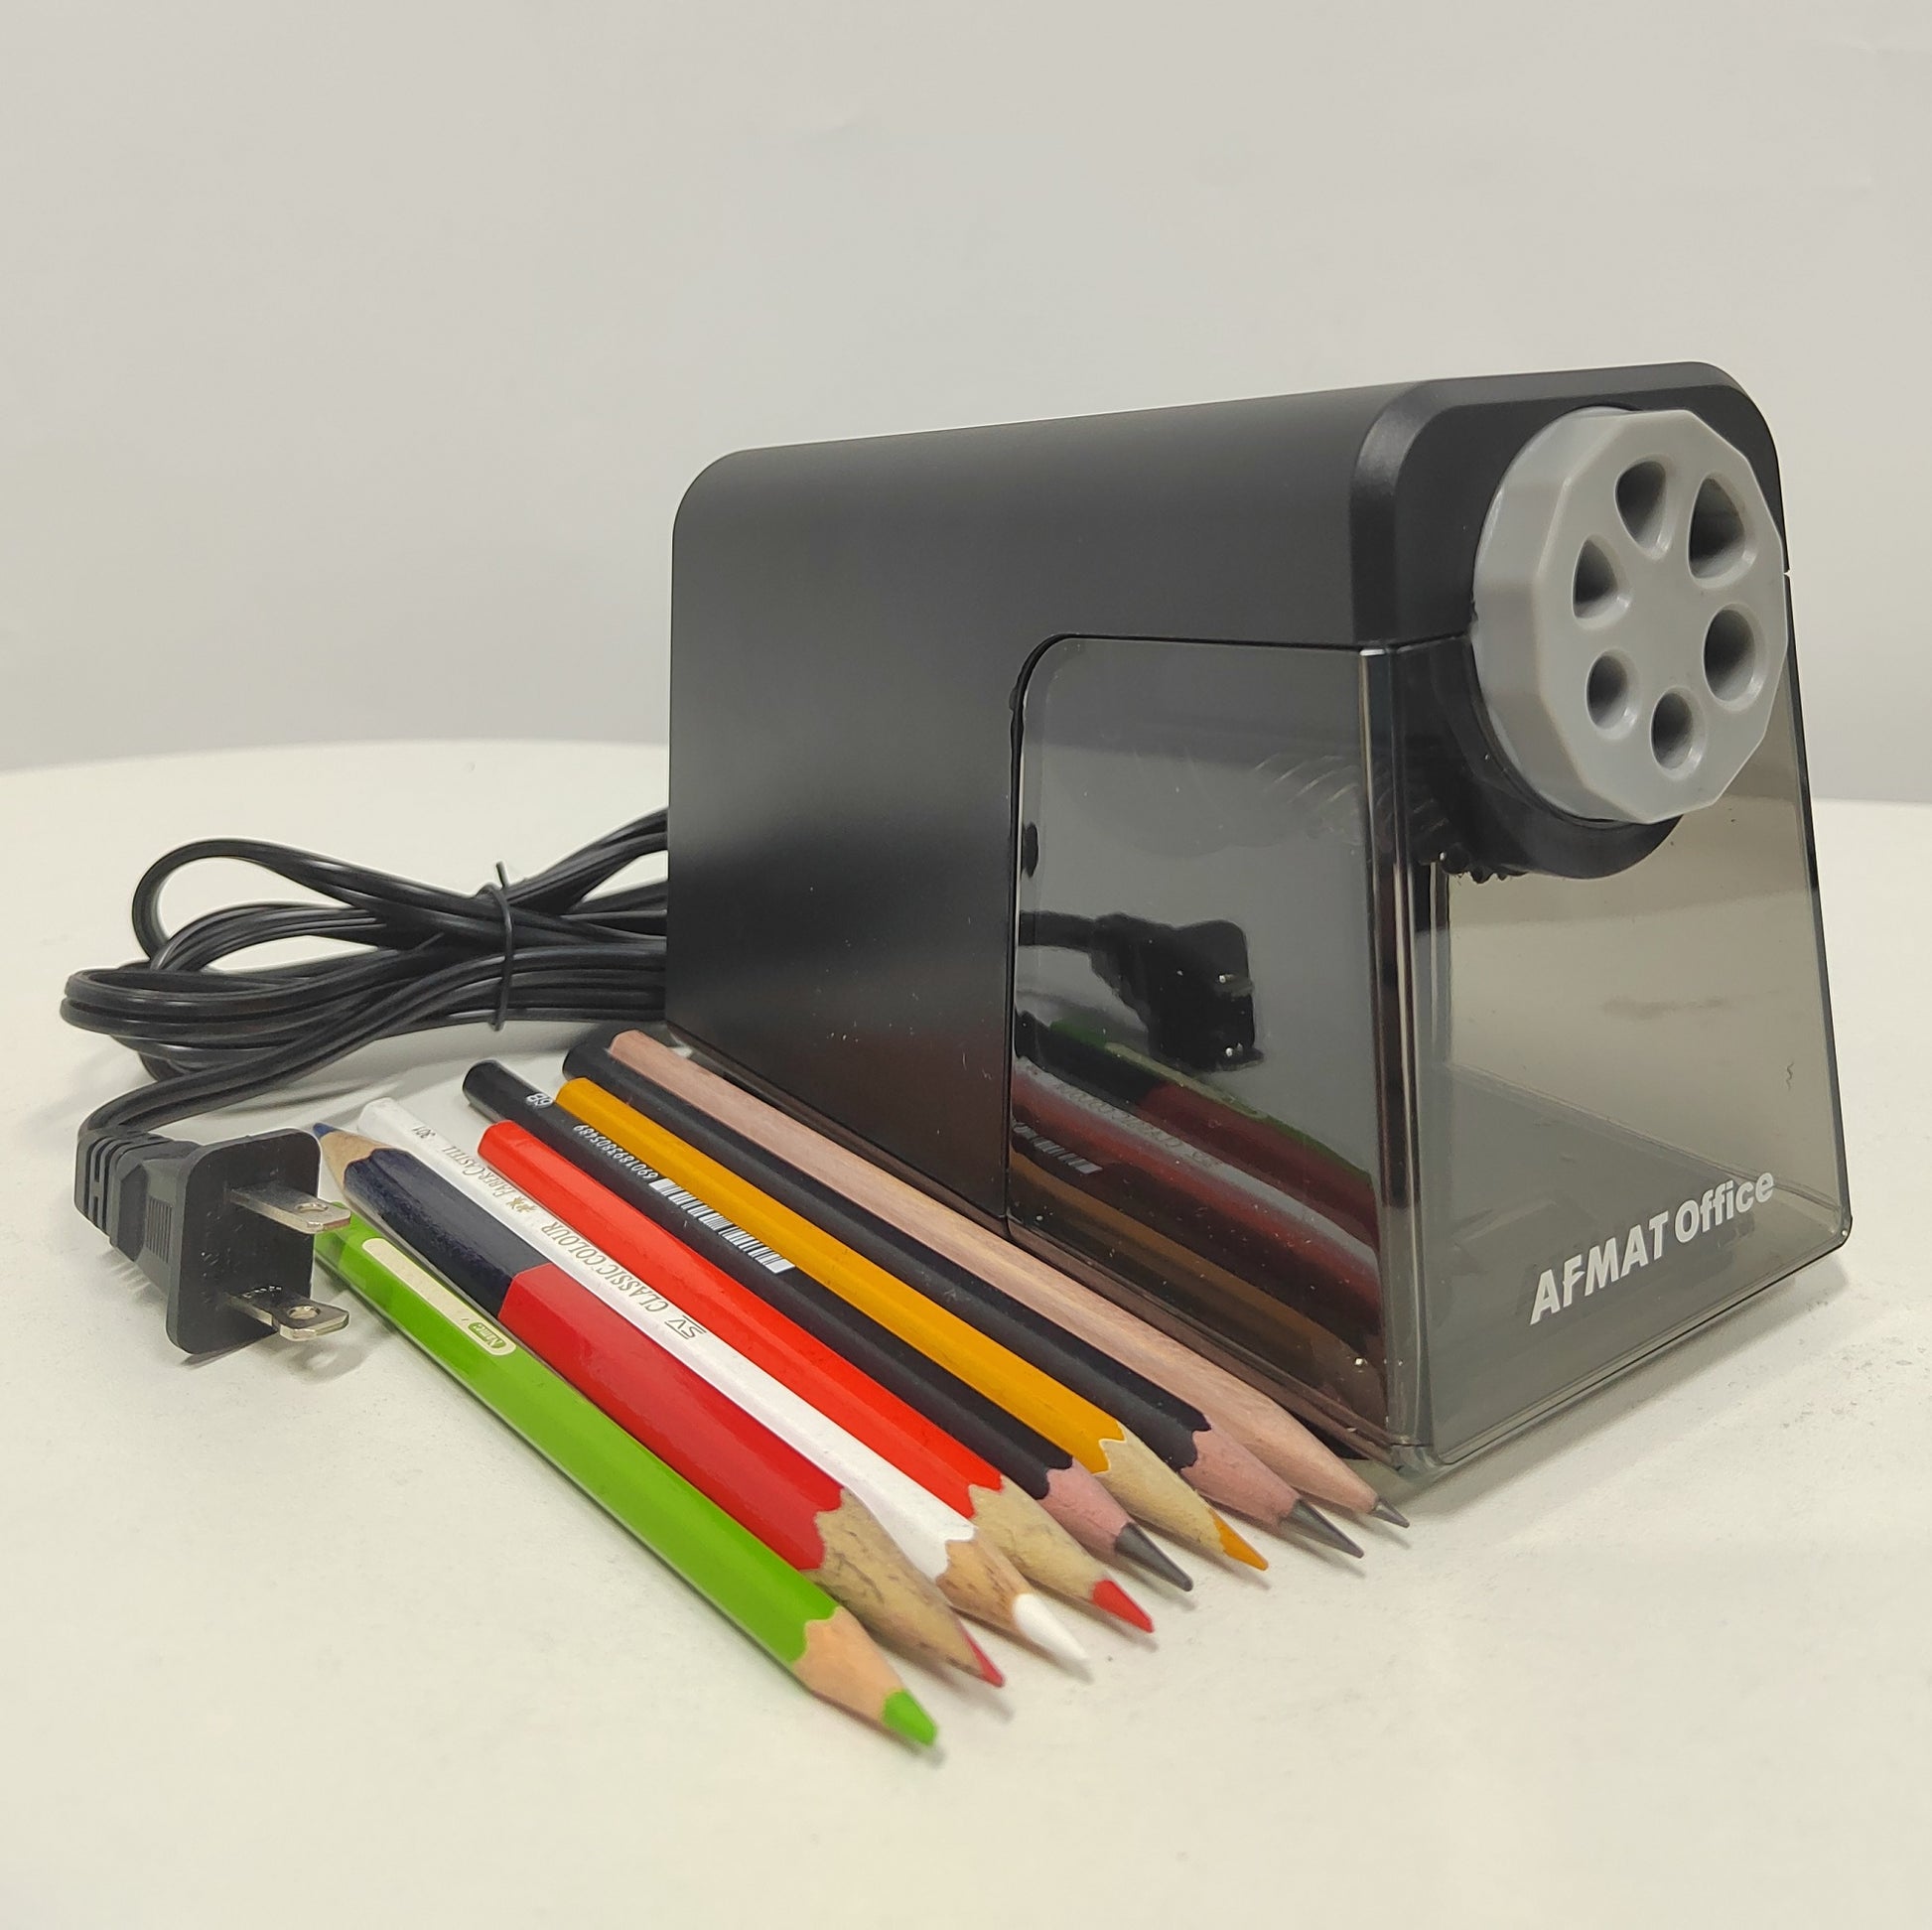 Electric Pencil Sharpener Heavy Duty, 6 Holes, Auto Stop AFMAT Pencil  Sharpeners for School, Classroom Electric Sharpener for 6-11mm Pencils,  7000